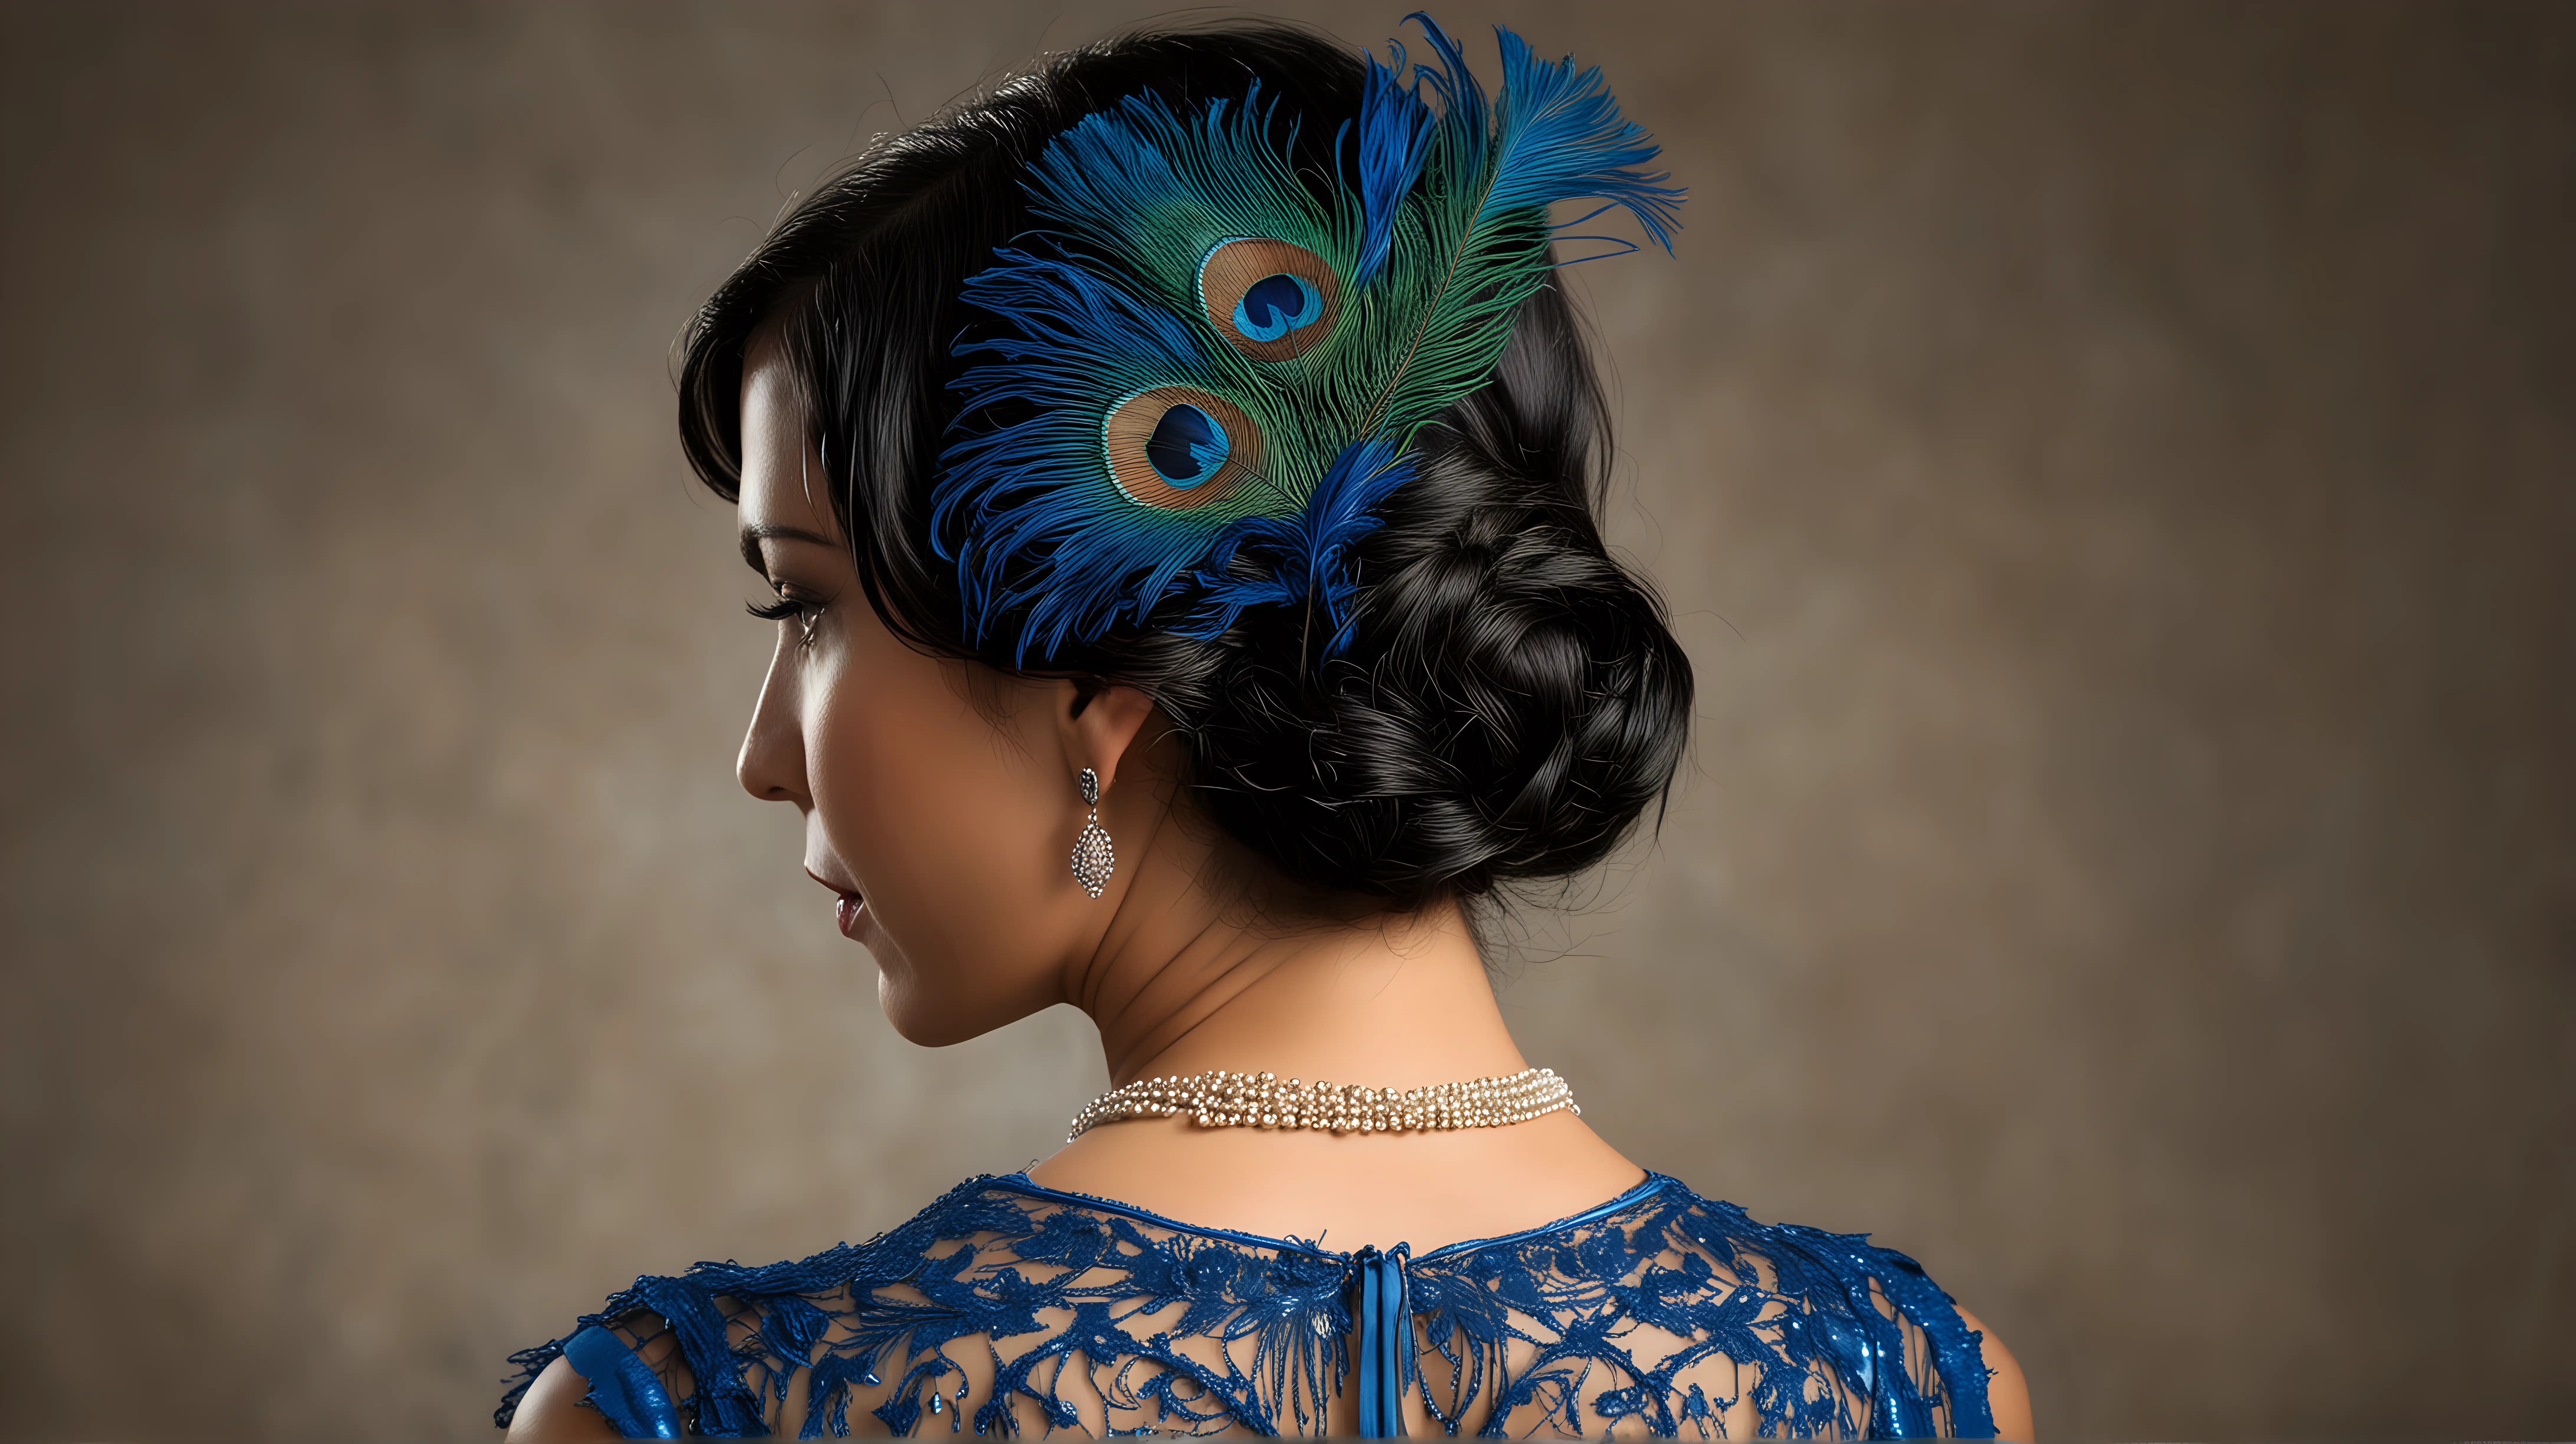 Latin Woman in 1920s Blue Dress with Peacock Feather